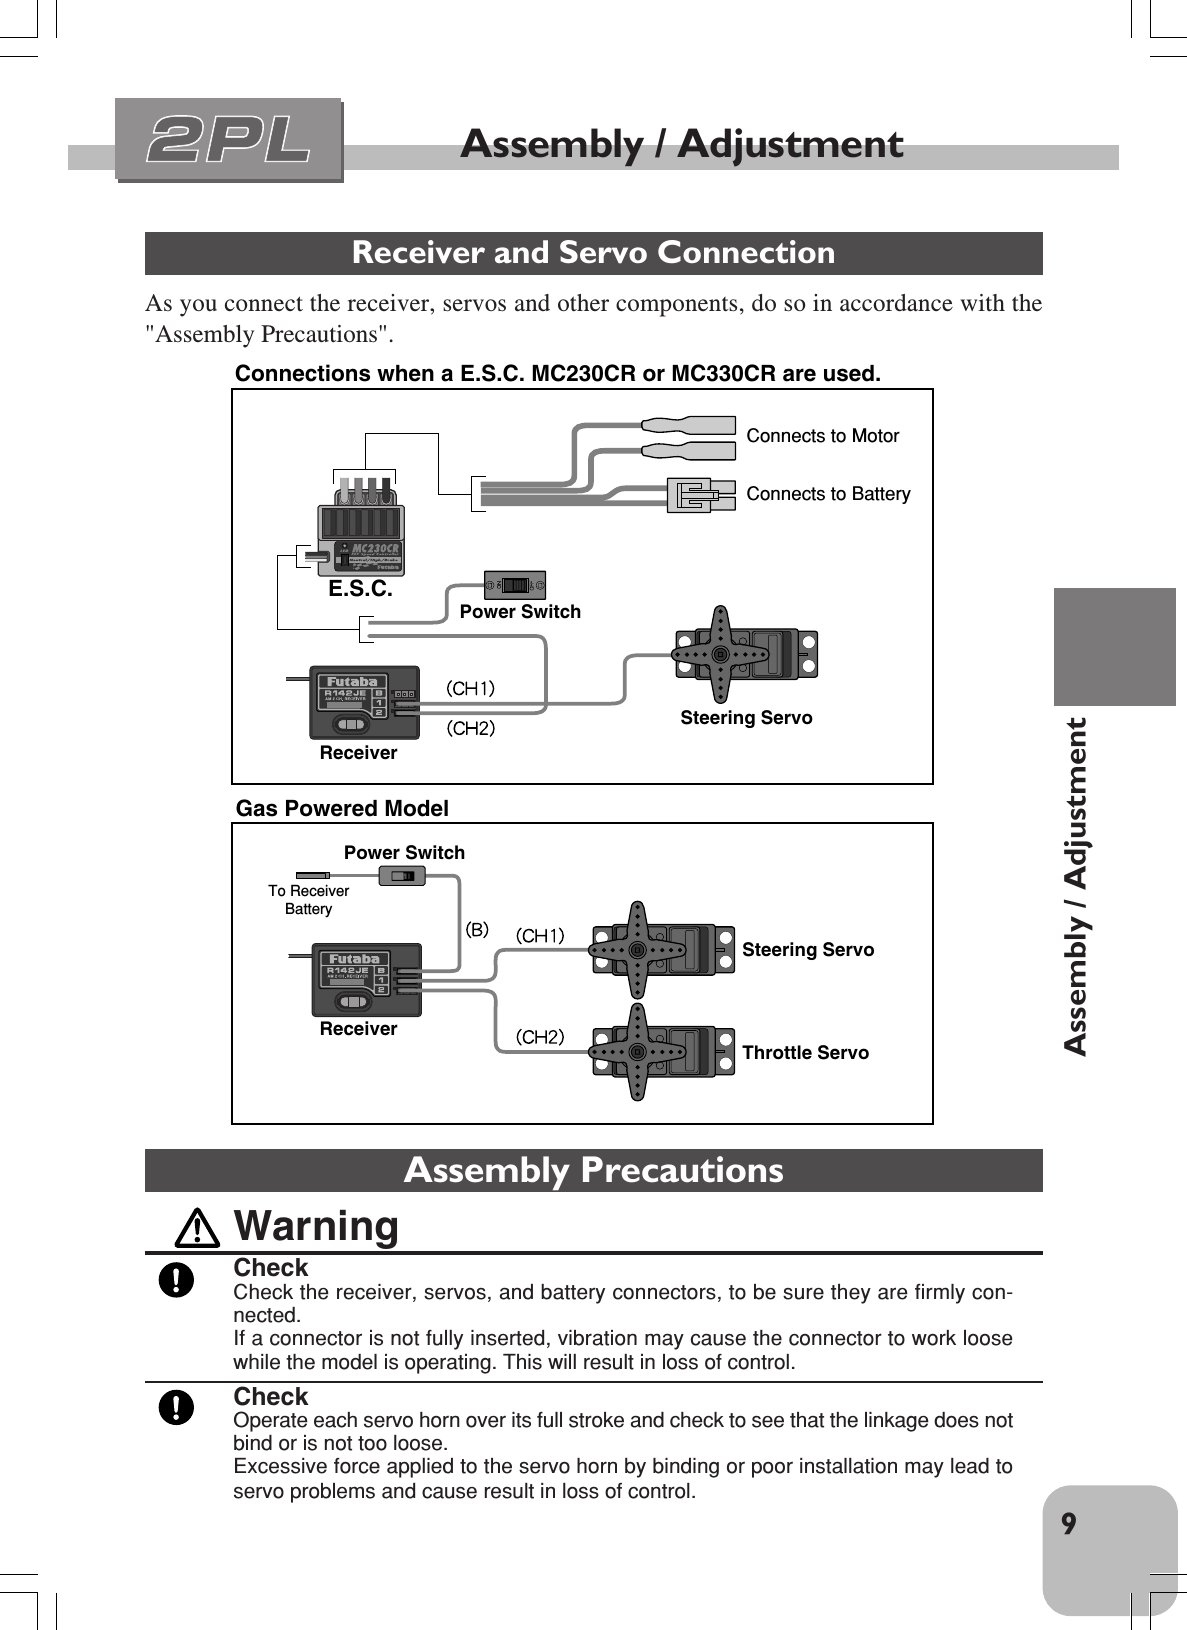 9Assembly / AdjustmentAssembly / AdjustmentReceiver and Servo ConnectionAs you connect the receiver, servos and other components, do so in accordance with the&quot;Assembly Precautions&quot;.Connections when a E.S.C. MC230CR or MC330CR are used.Steering ServoThrottle ServoReceiverReceiverPower SwitchTo Receiver    BatterySteering ServoE.S.C.Power SwitchConnects to MotorConnects to BatteryGas Powered ModelAssembly PrecautionsWarningCheckCheck the receiver, servos, and battery connectors, to be sure they are firmly con-nected.If a connector is not fully inserted, vibration may cause the connector to work loosewhile the model is operating. This will result in loss of control.CheckOperate each servo horn over its full stroke and check to see that the linkage does notbind or is not too loose.Excessive force applied to the servo horn by binding or poor installation may lead toservo problems and cause result in loss of control.